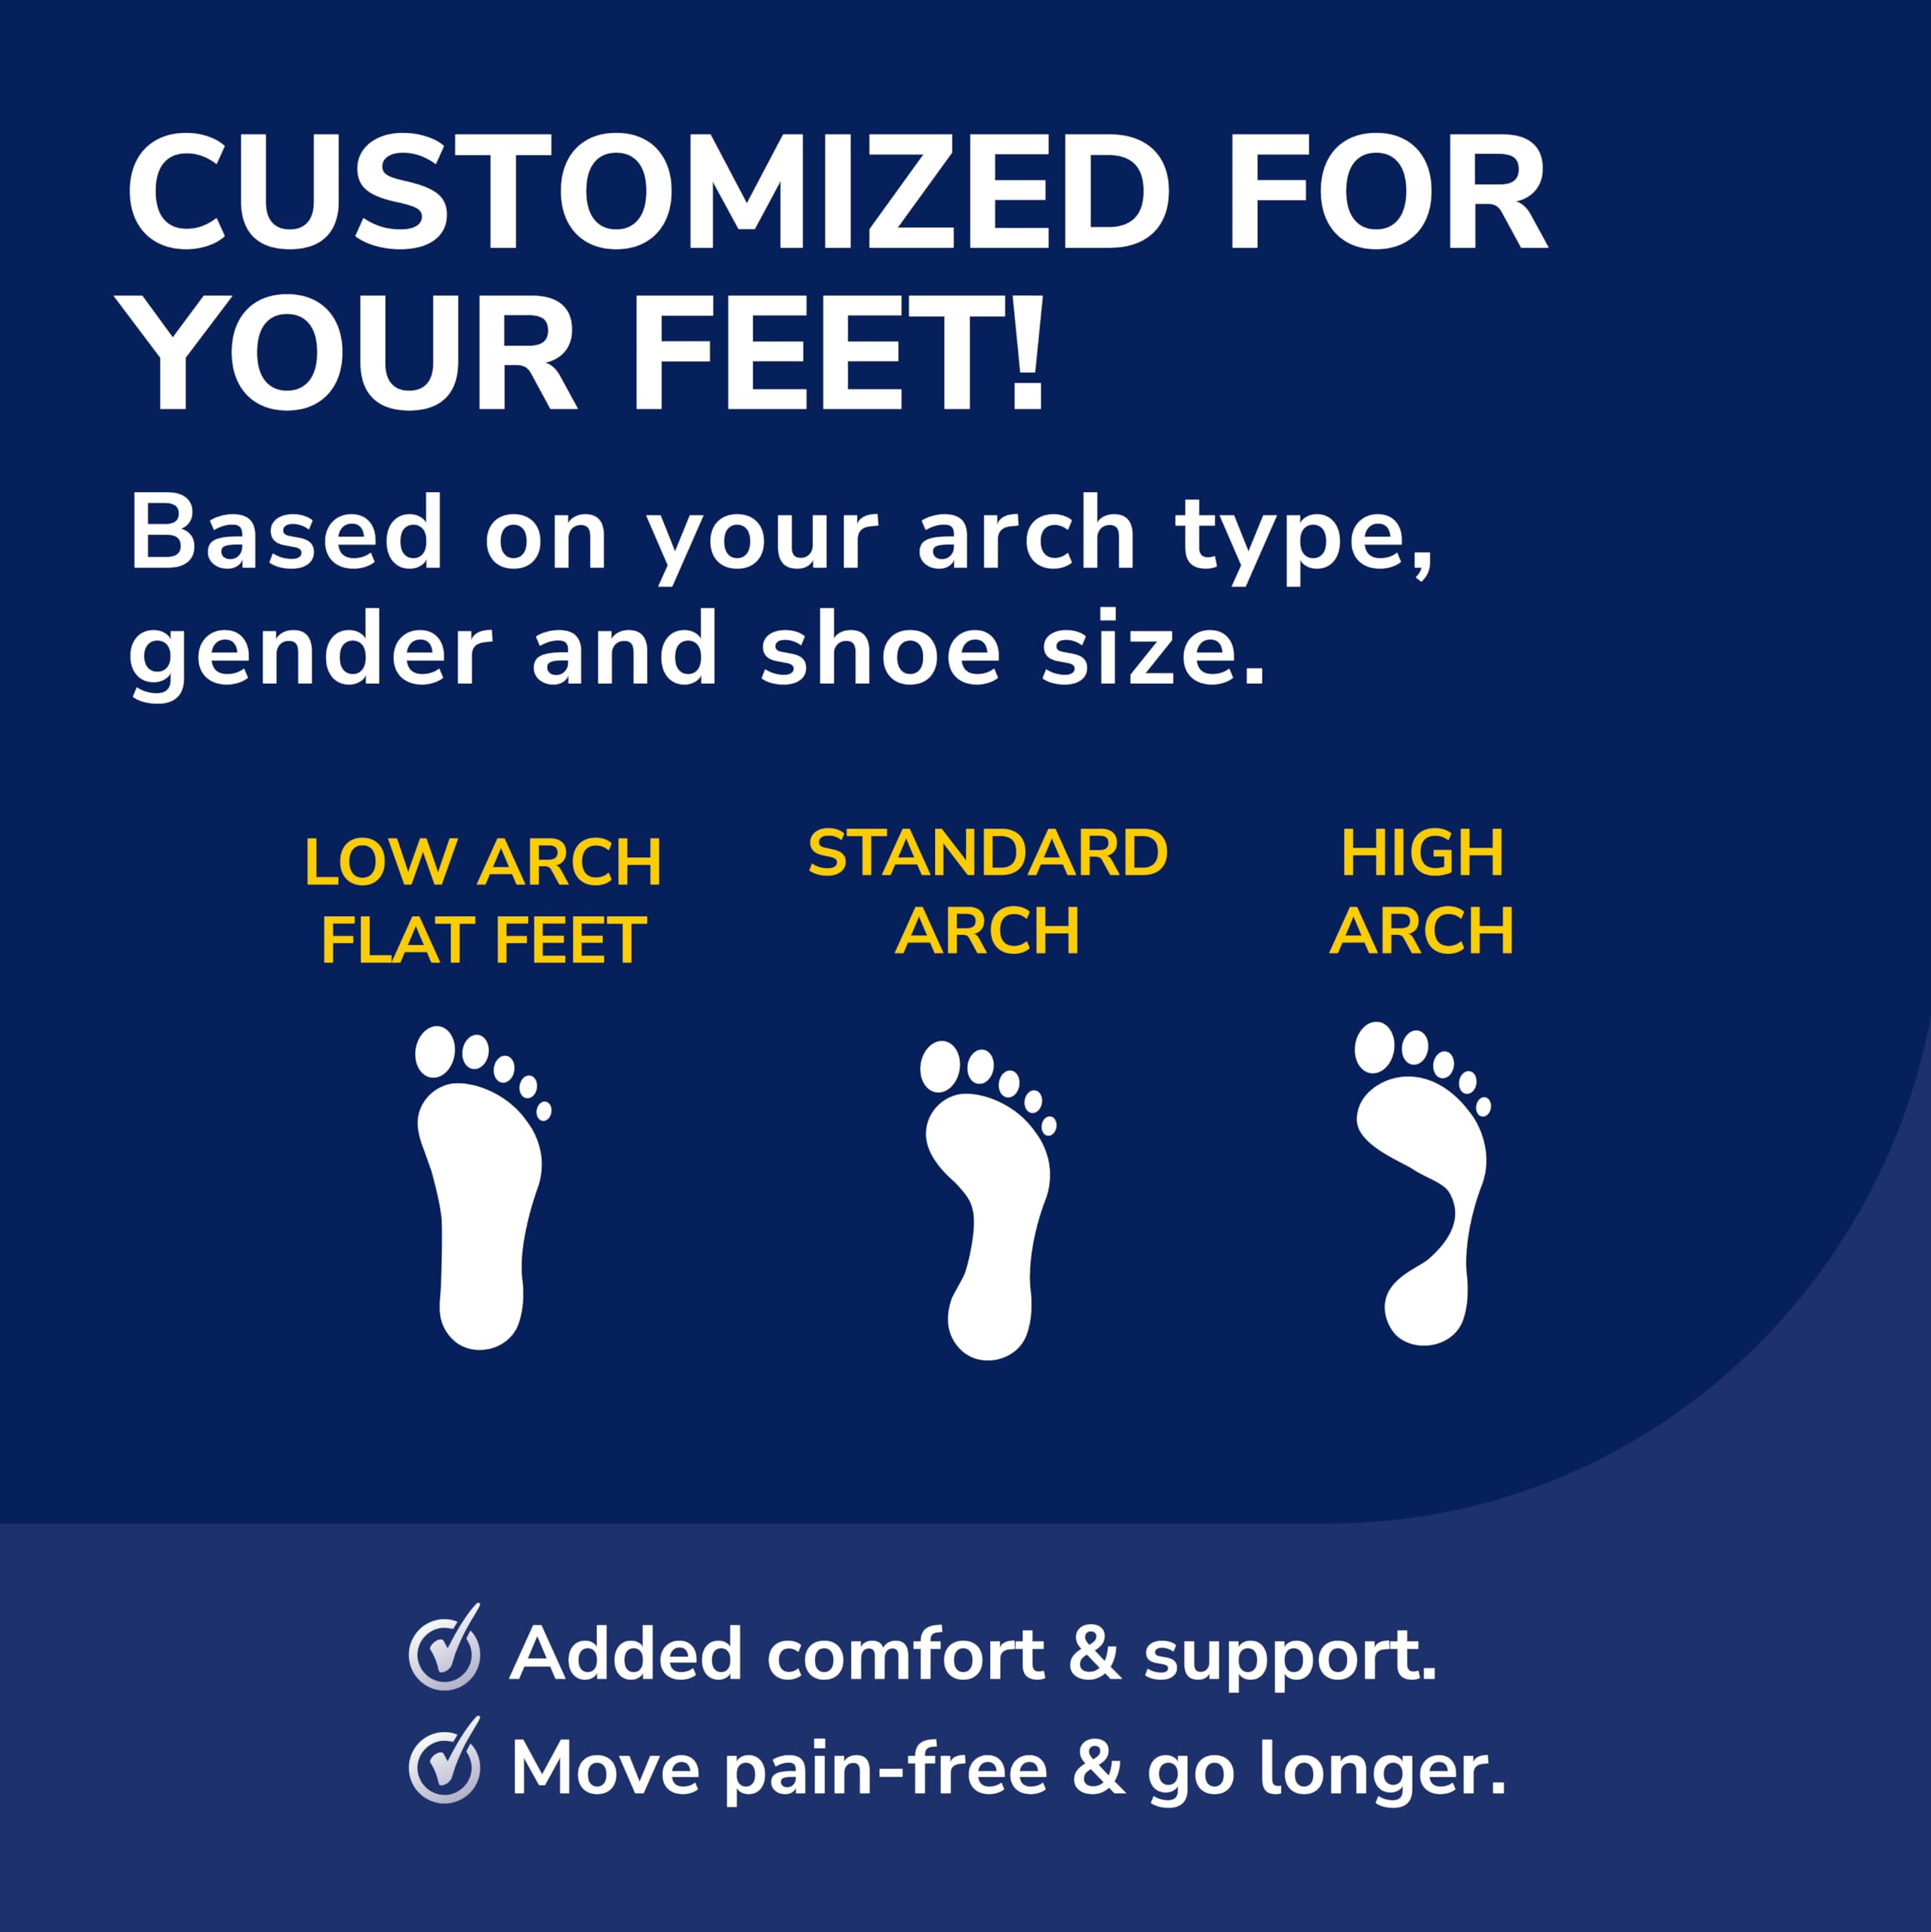 Dr. Scholl’s® Custom Fit® Orthotics 3/4 Length Inserts, CF 760, Customized for Your Foot & Arch, Immediate All-Day Pain Relief, Lower Back, Knee, Plantar Fascia, Heel, Insoles Fit Men & Womens Shoes